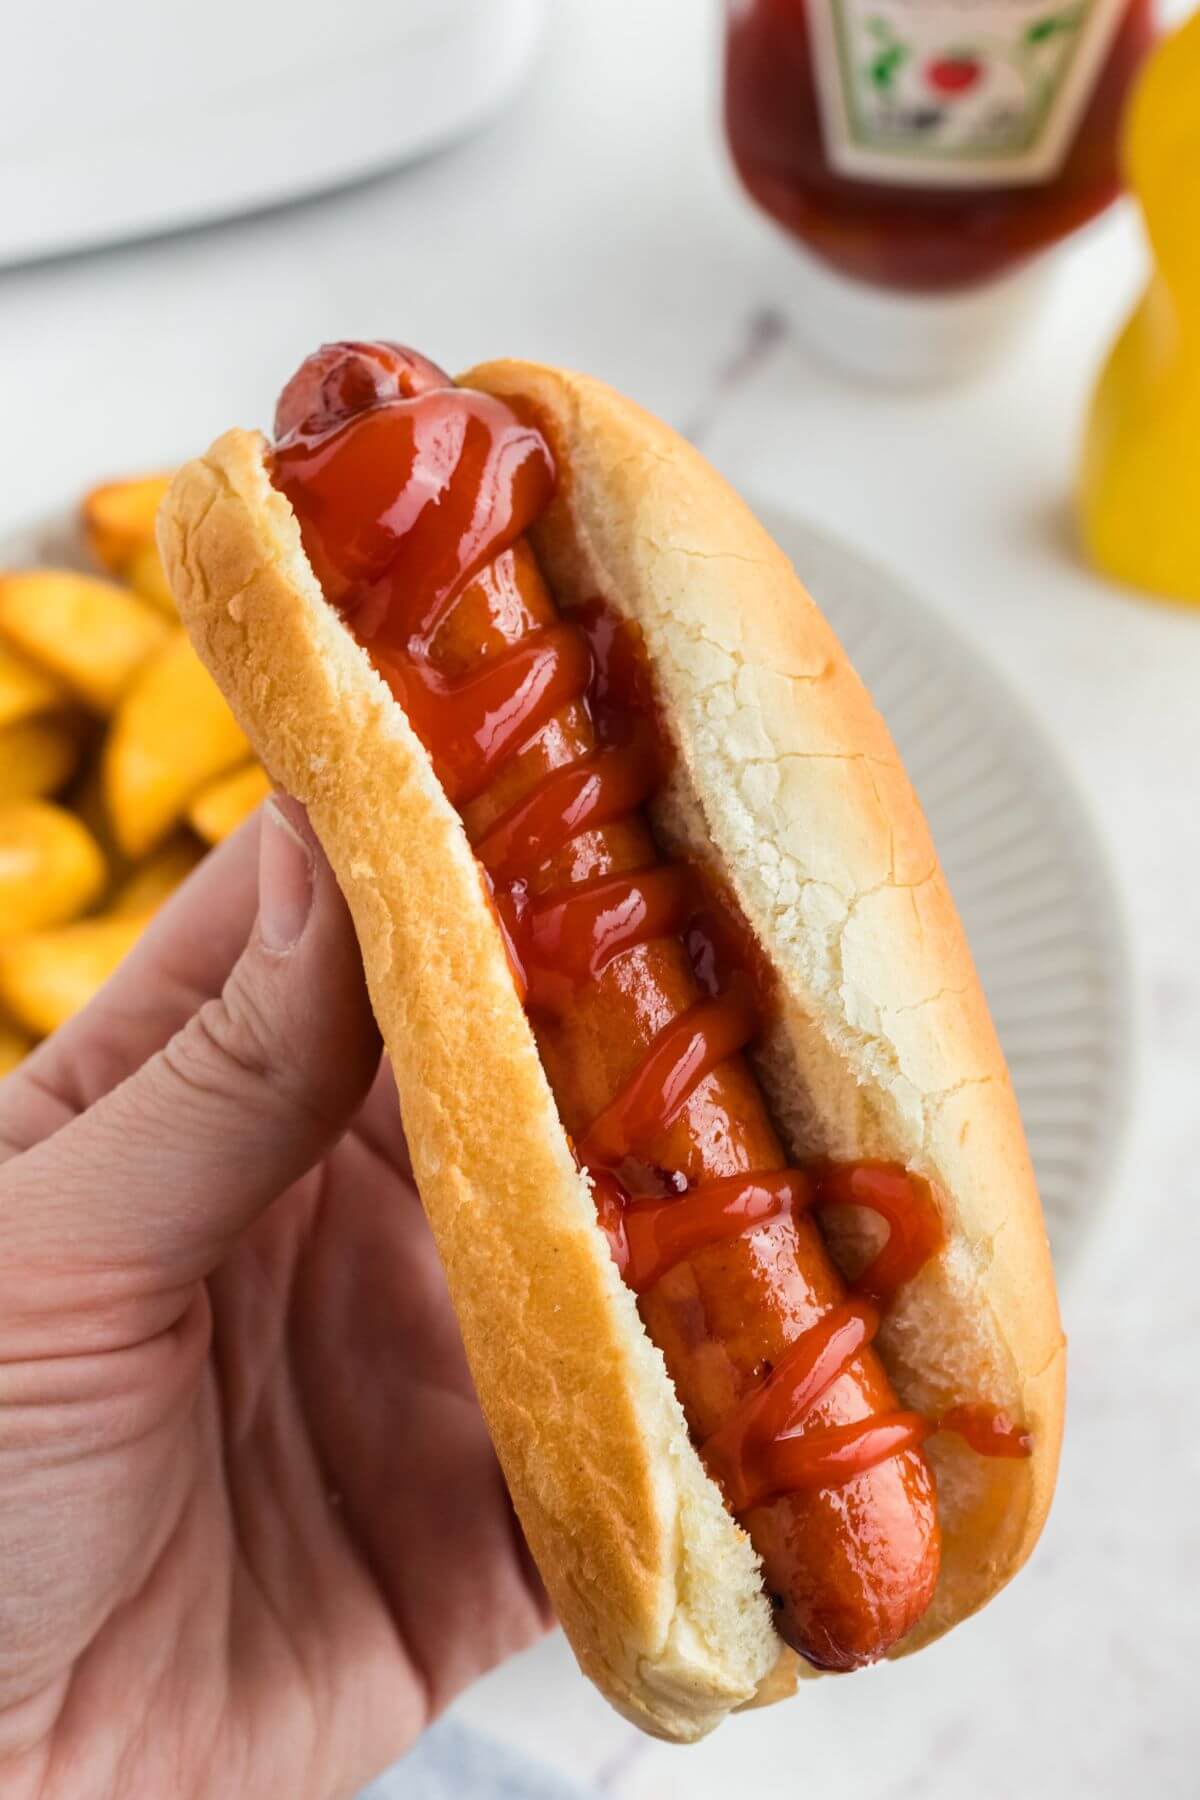 Juicy golden brown hot dog in a bun with ketchup drizzled on top being held over a plate. 